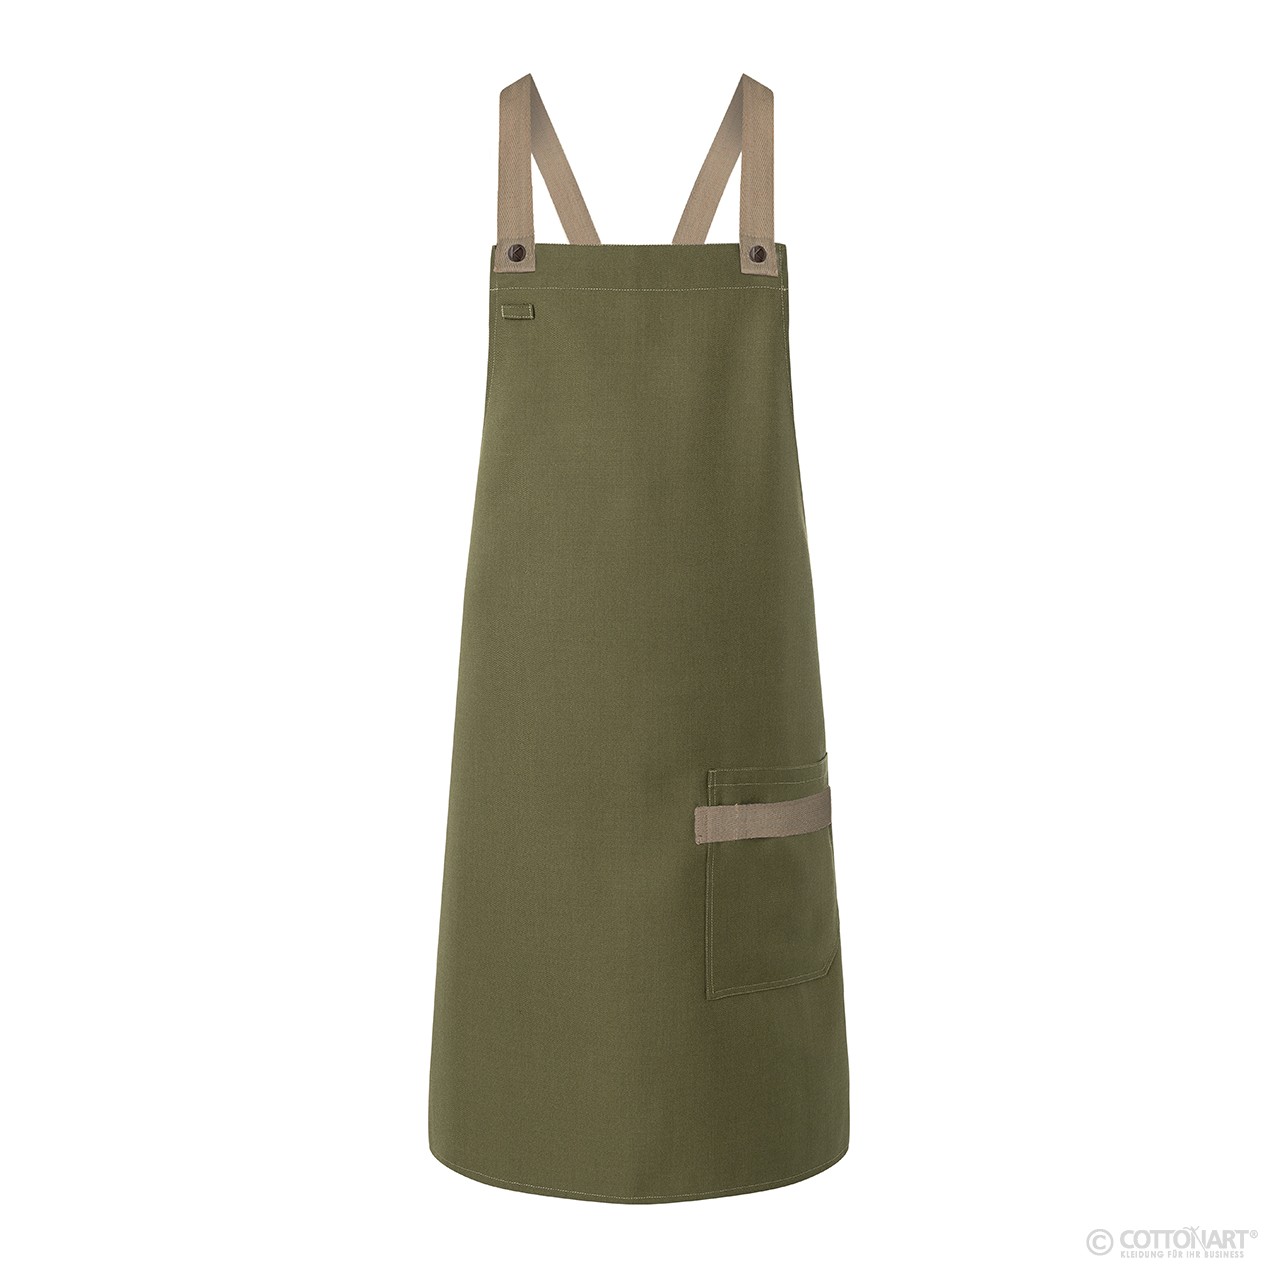 Bib Apron URBAN-LOOK with cross ribbons 85 x 70 cm Karlowsky® Moss Green One Size